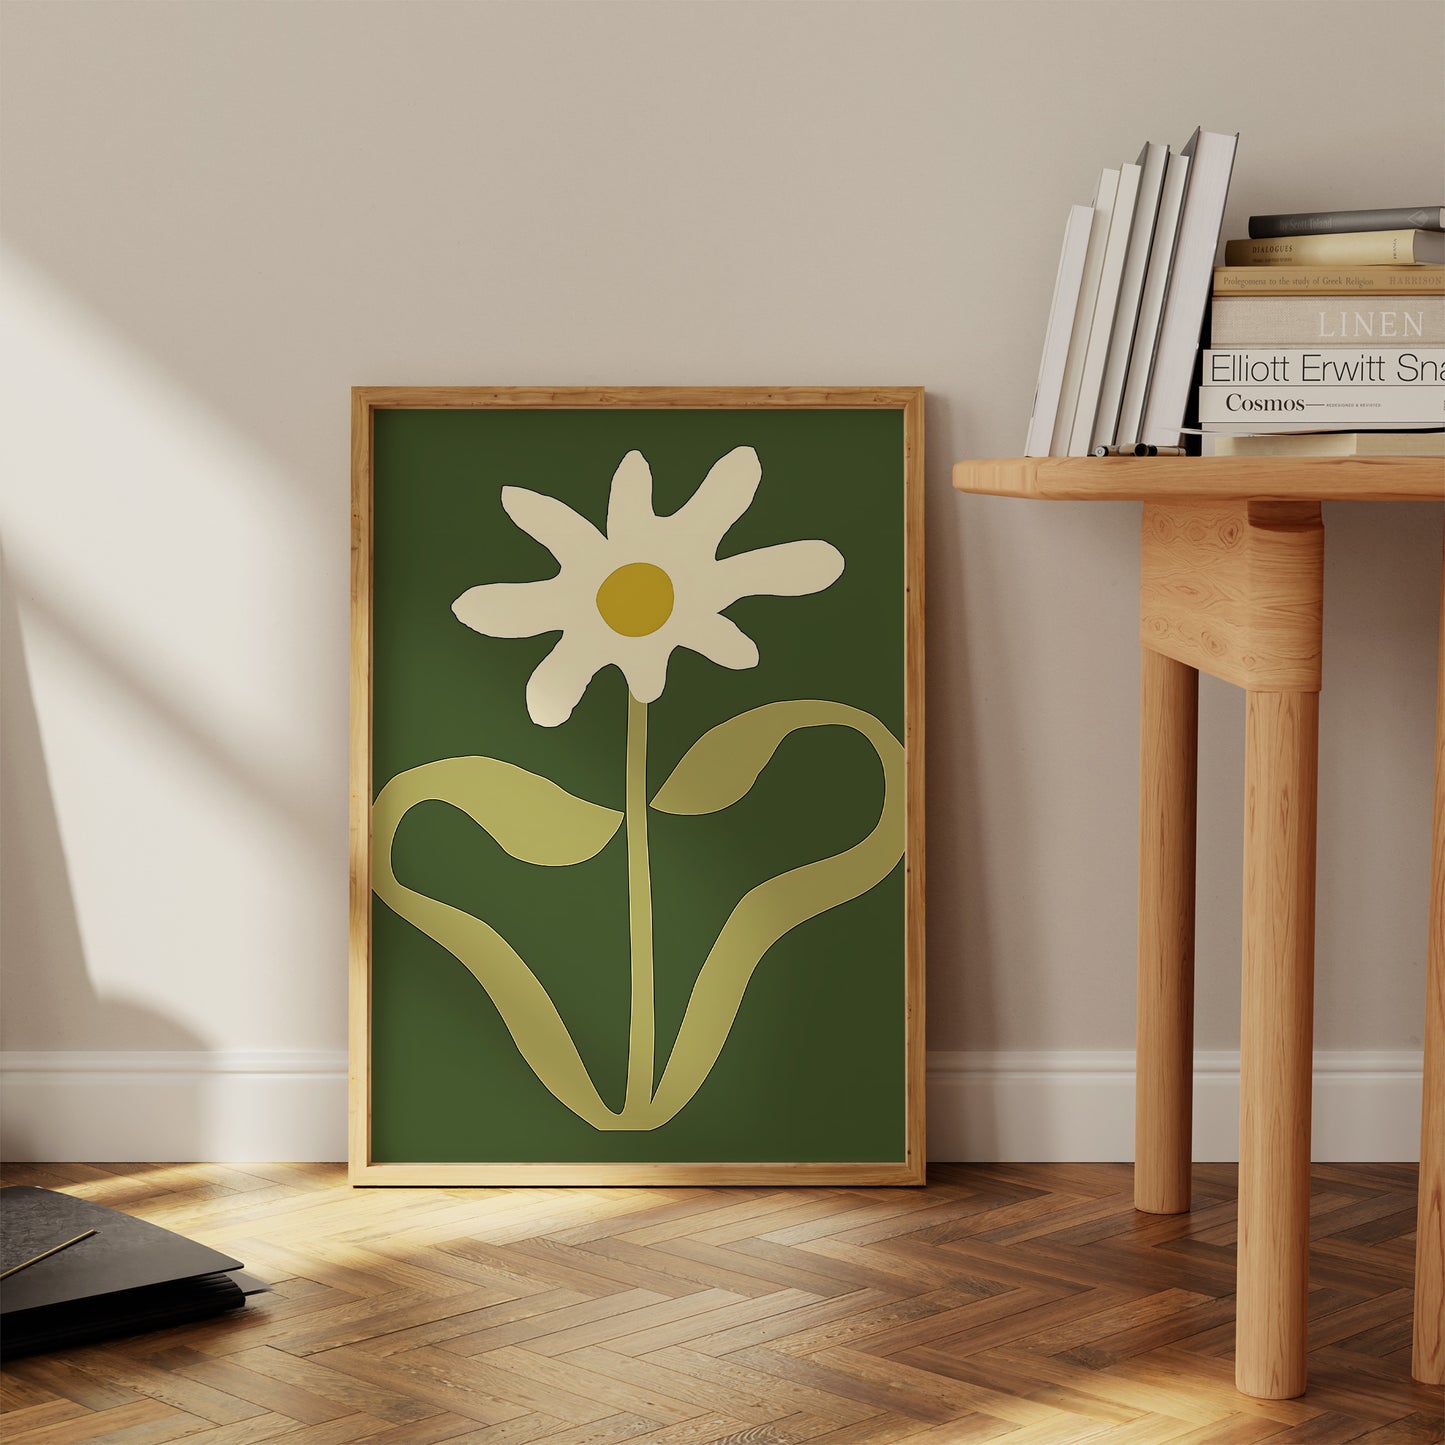 A framed painting of a simplistic white flower on a green background, leaning against a wall next to a wooden table.